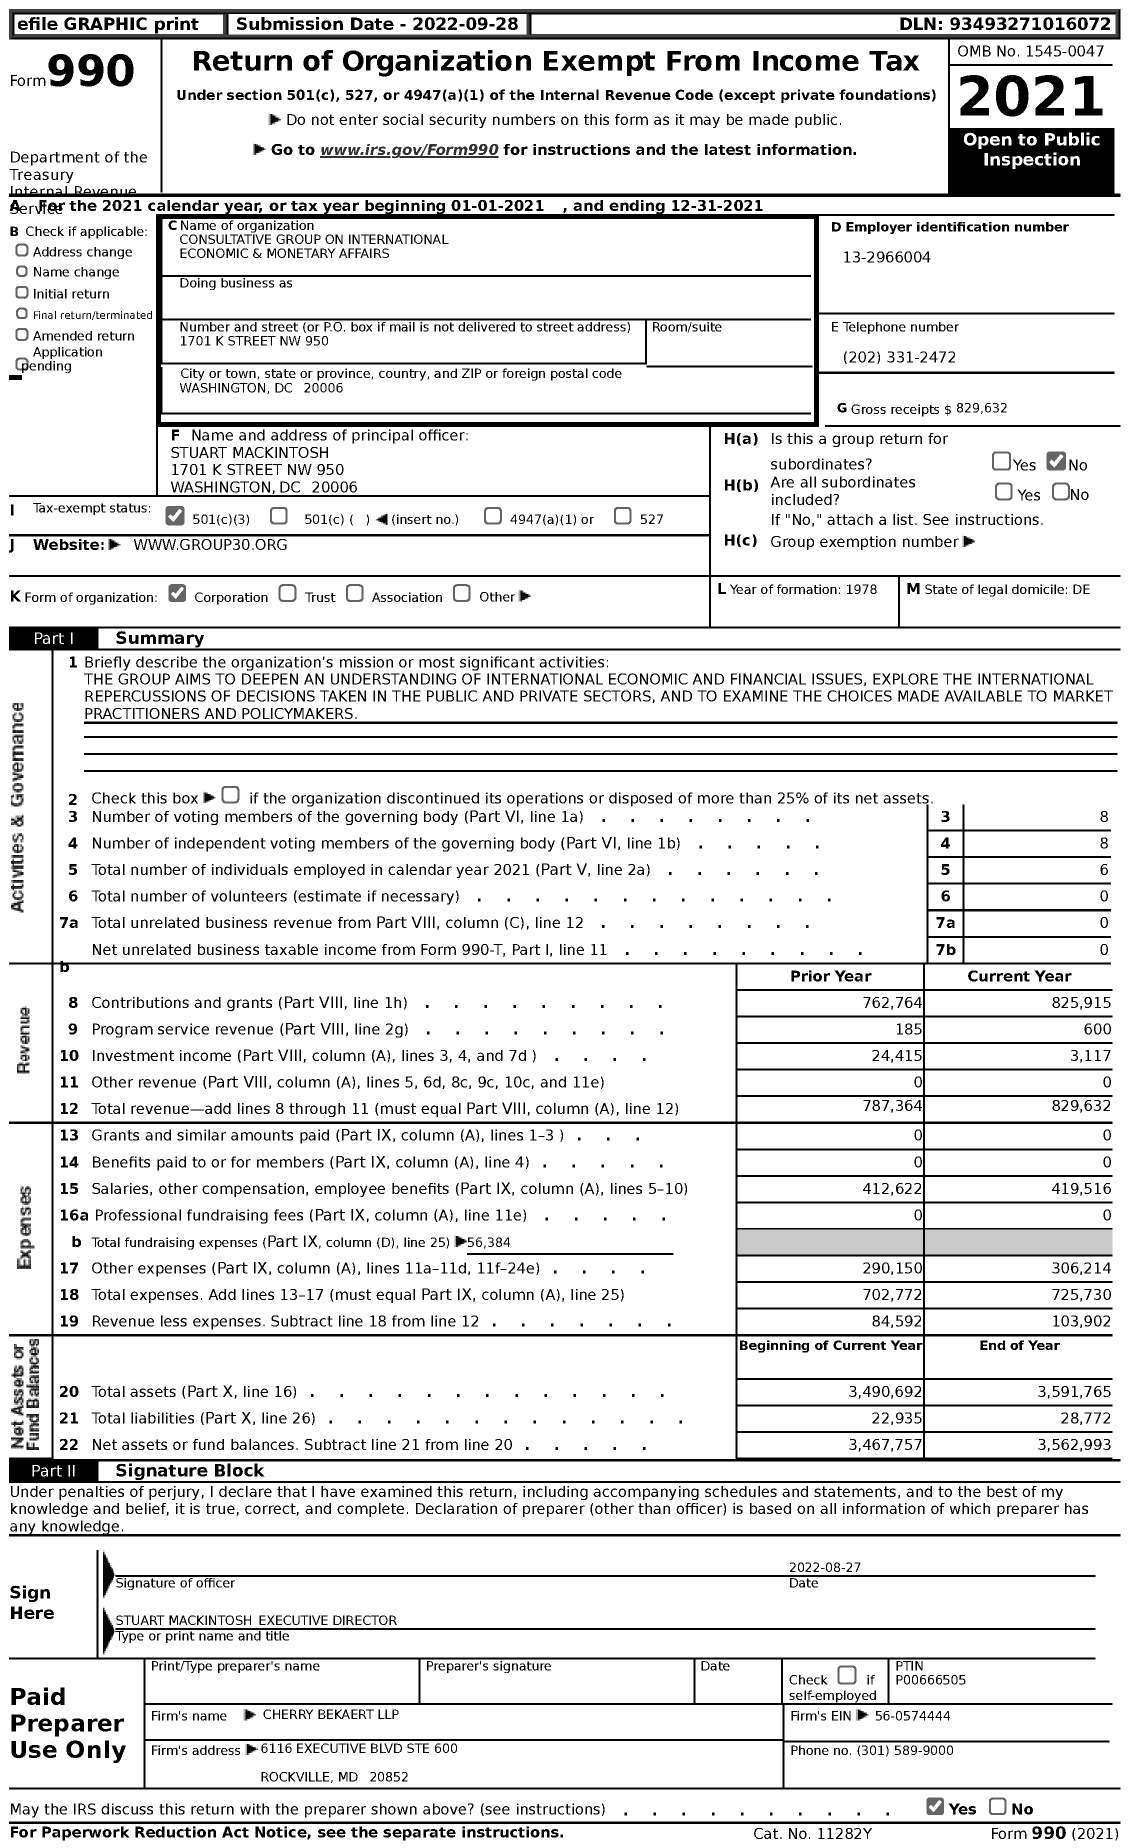 Image of first page of 2021 Form 990 for Consultative Group on International Economic and Monetary Affairs